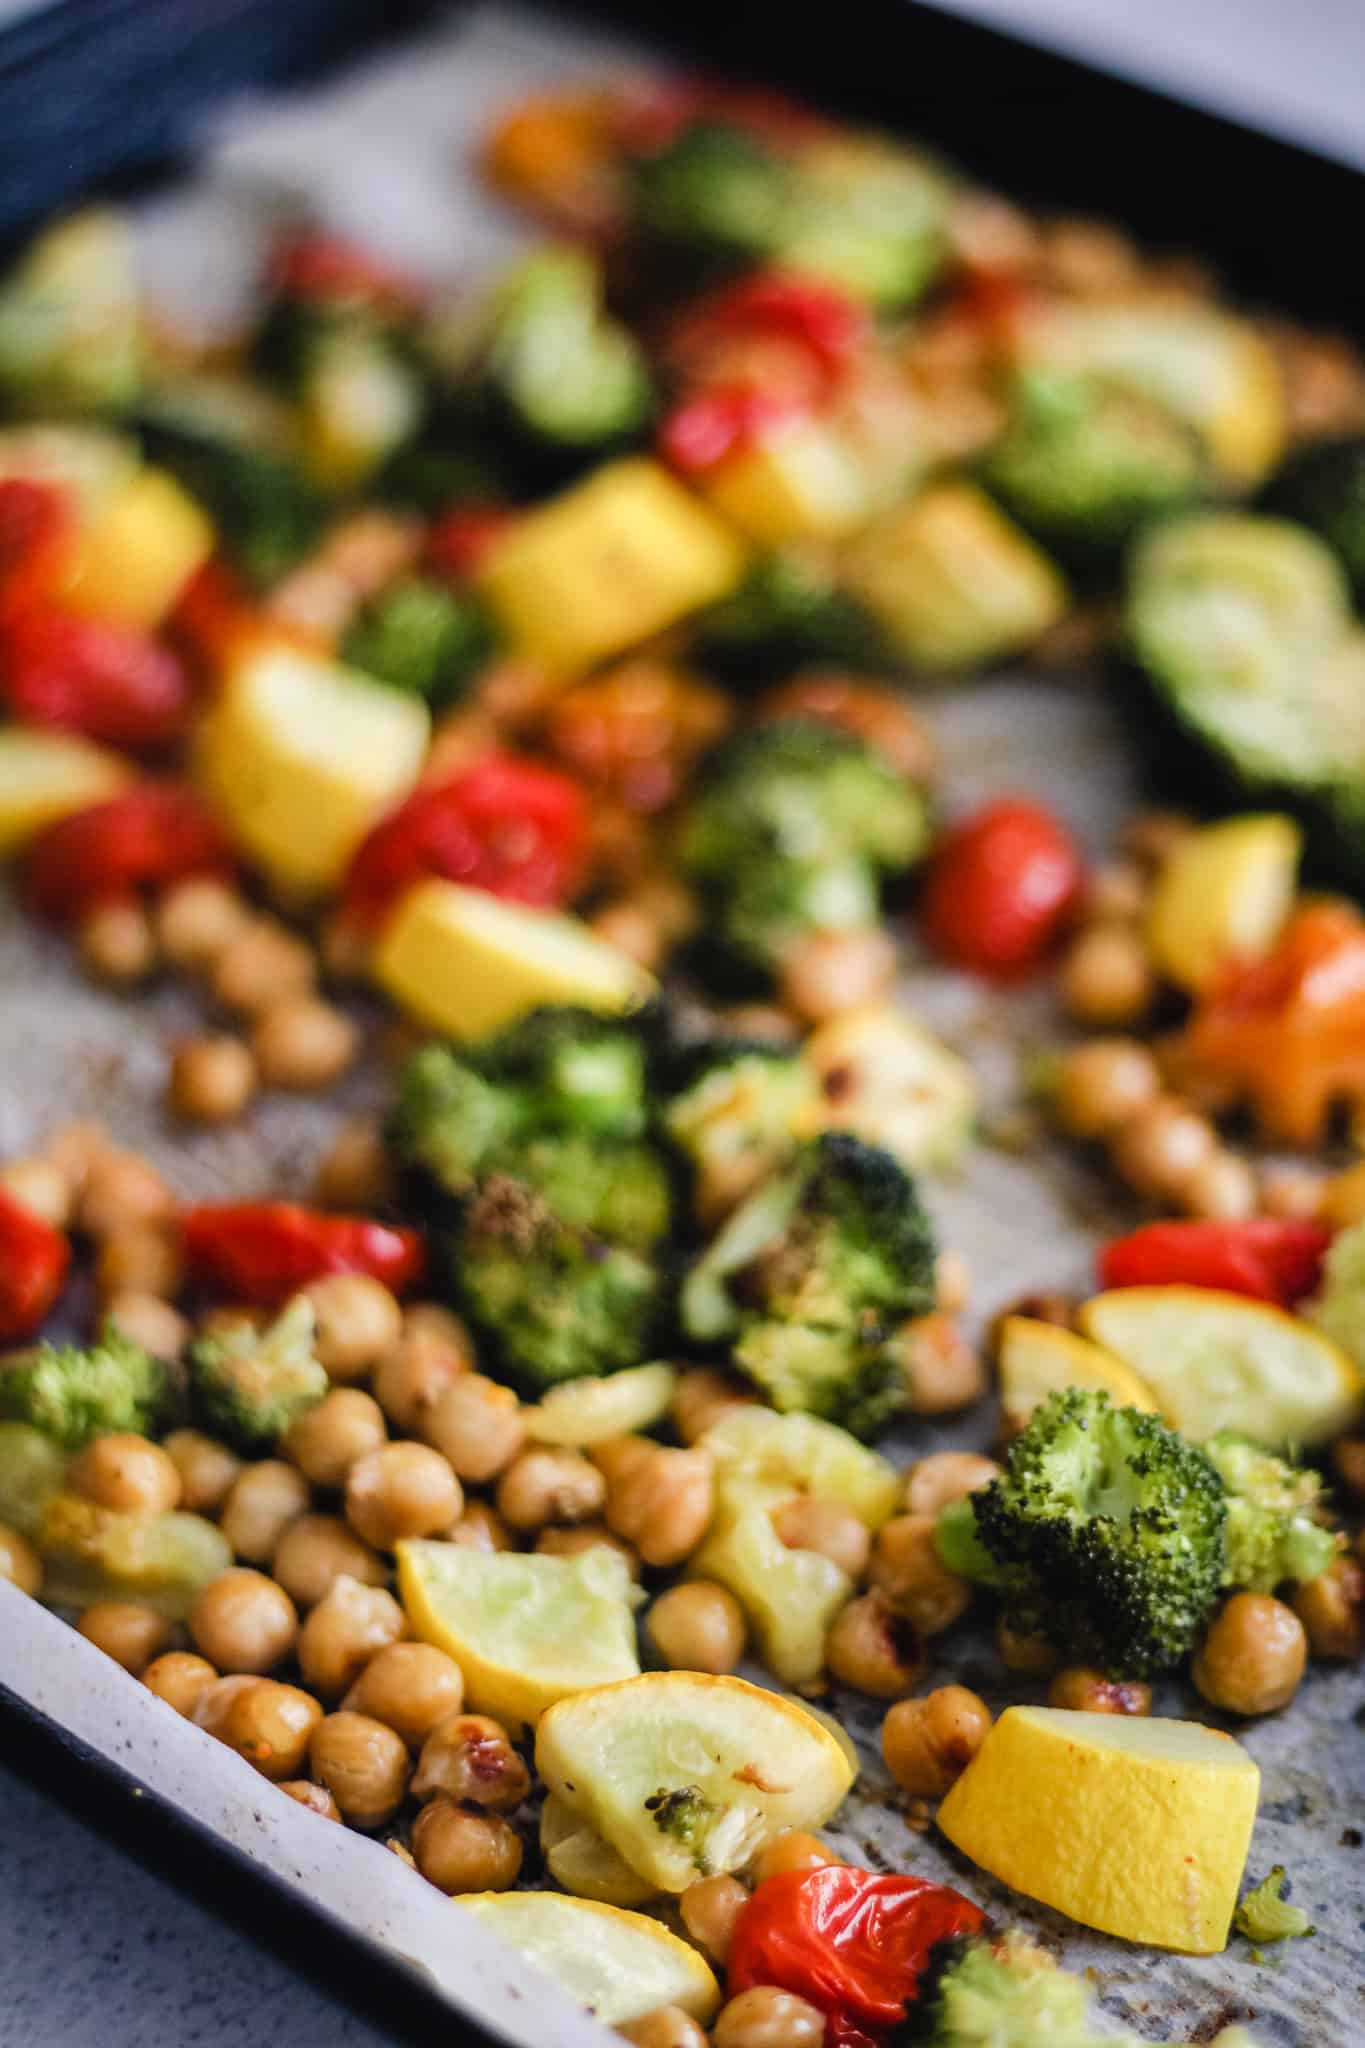 Roasted vegetables and chickpeas in a pan.